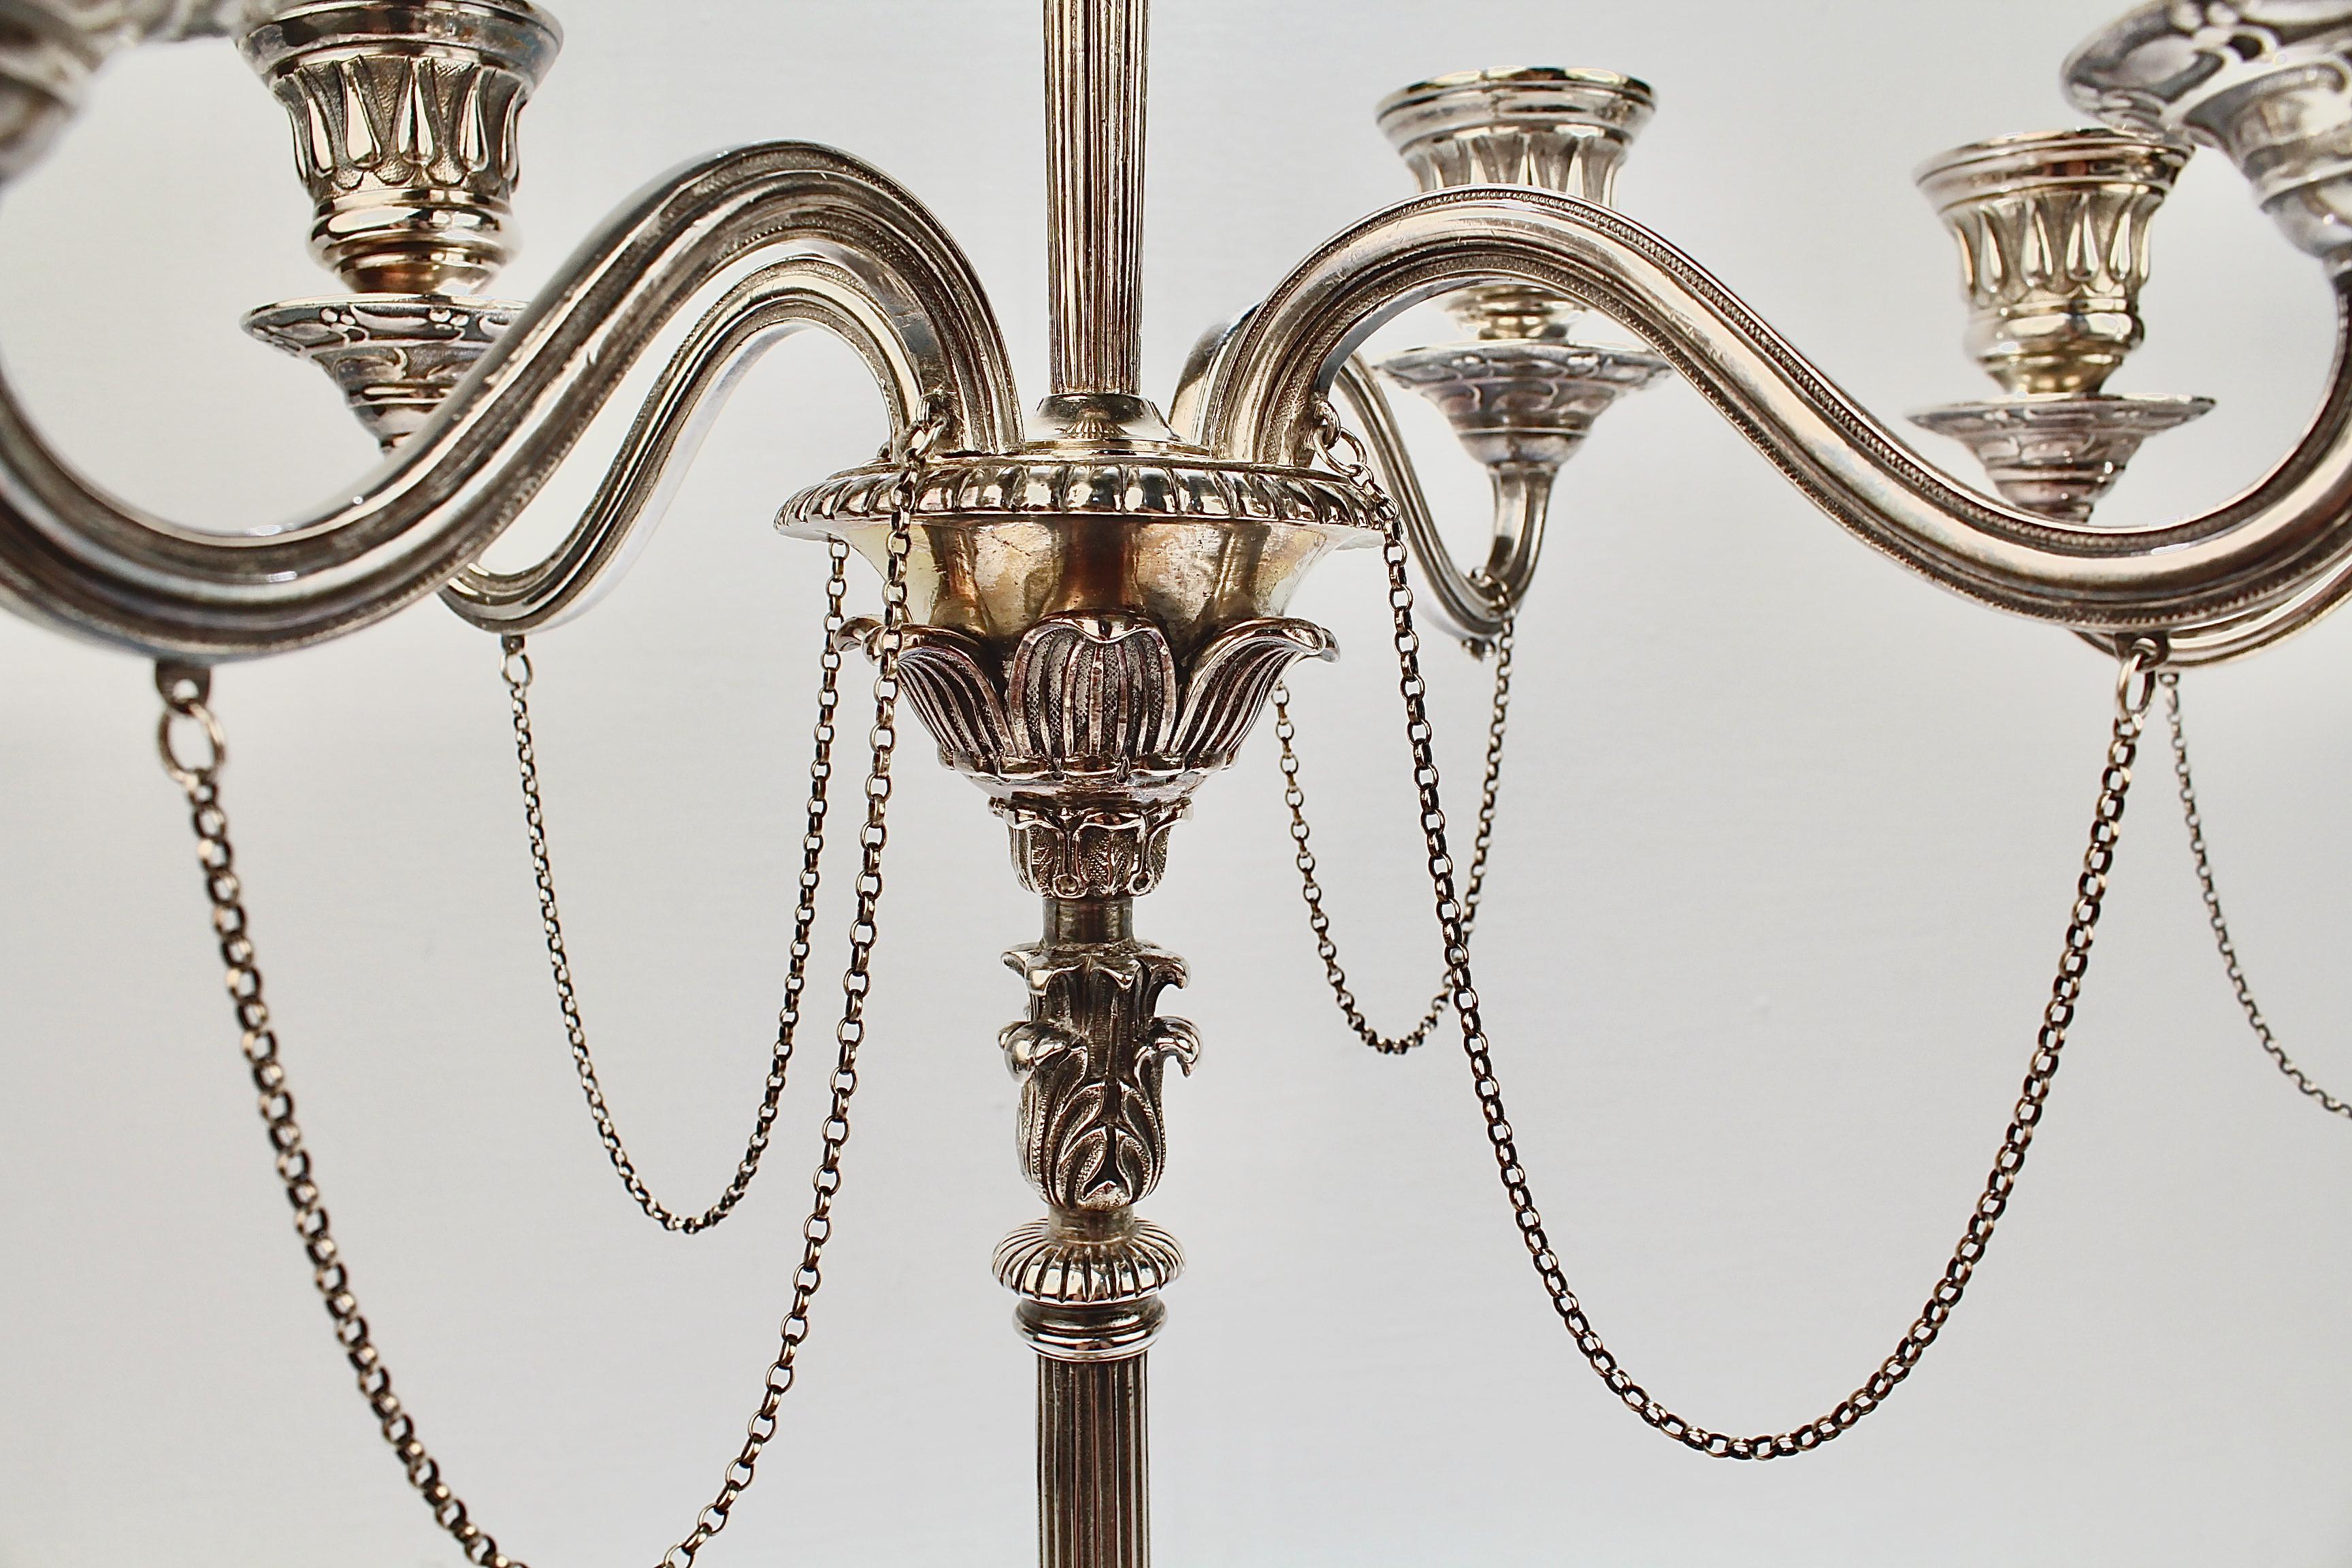 Pair of Elkington & Co Neoclassical Revival Silver Plated Five-Light Candelabra For Sale 9